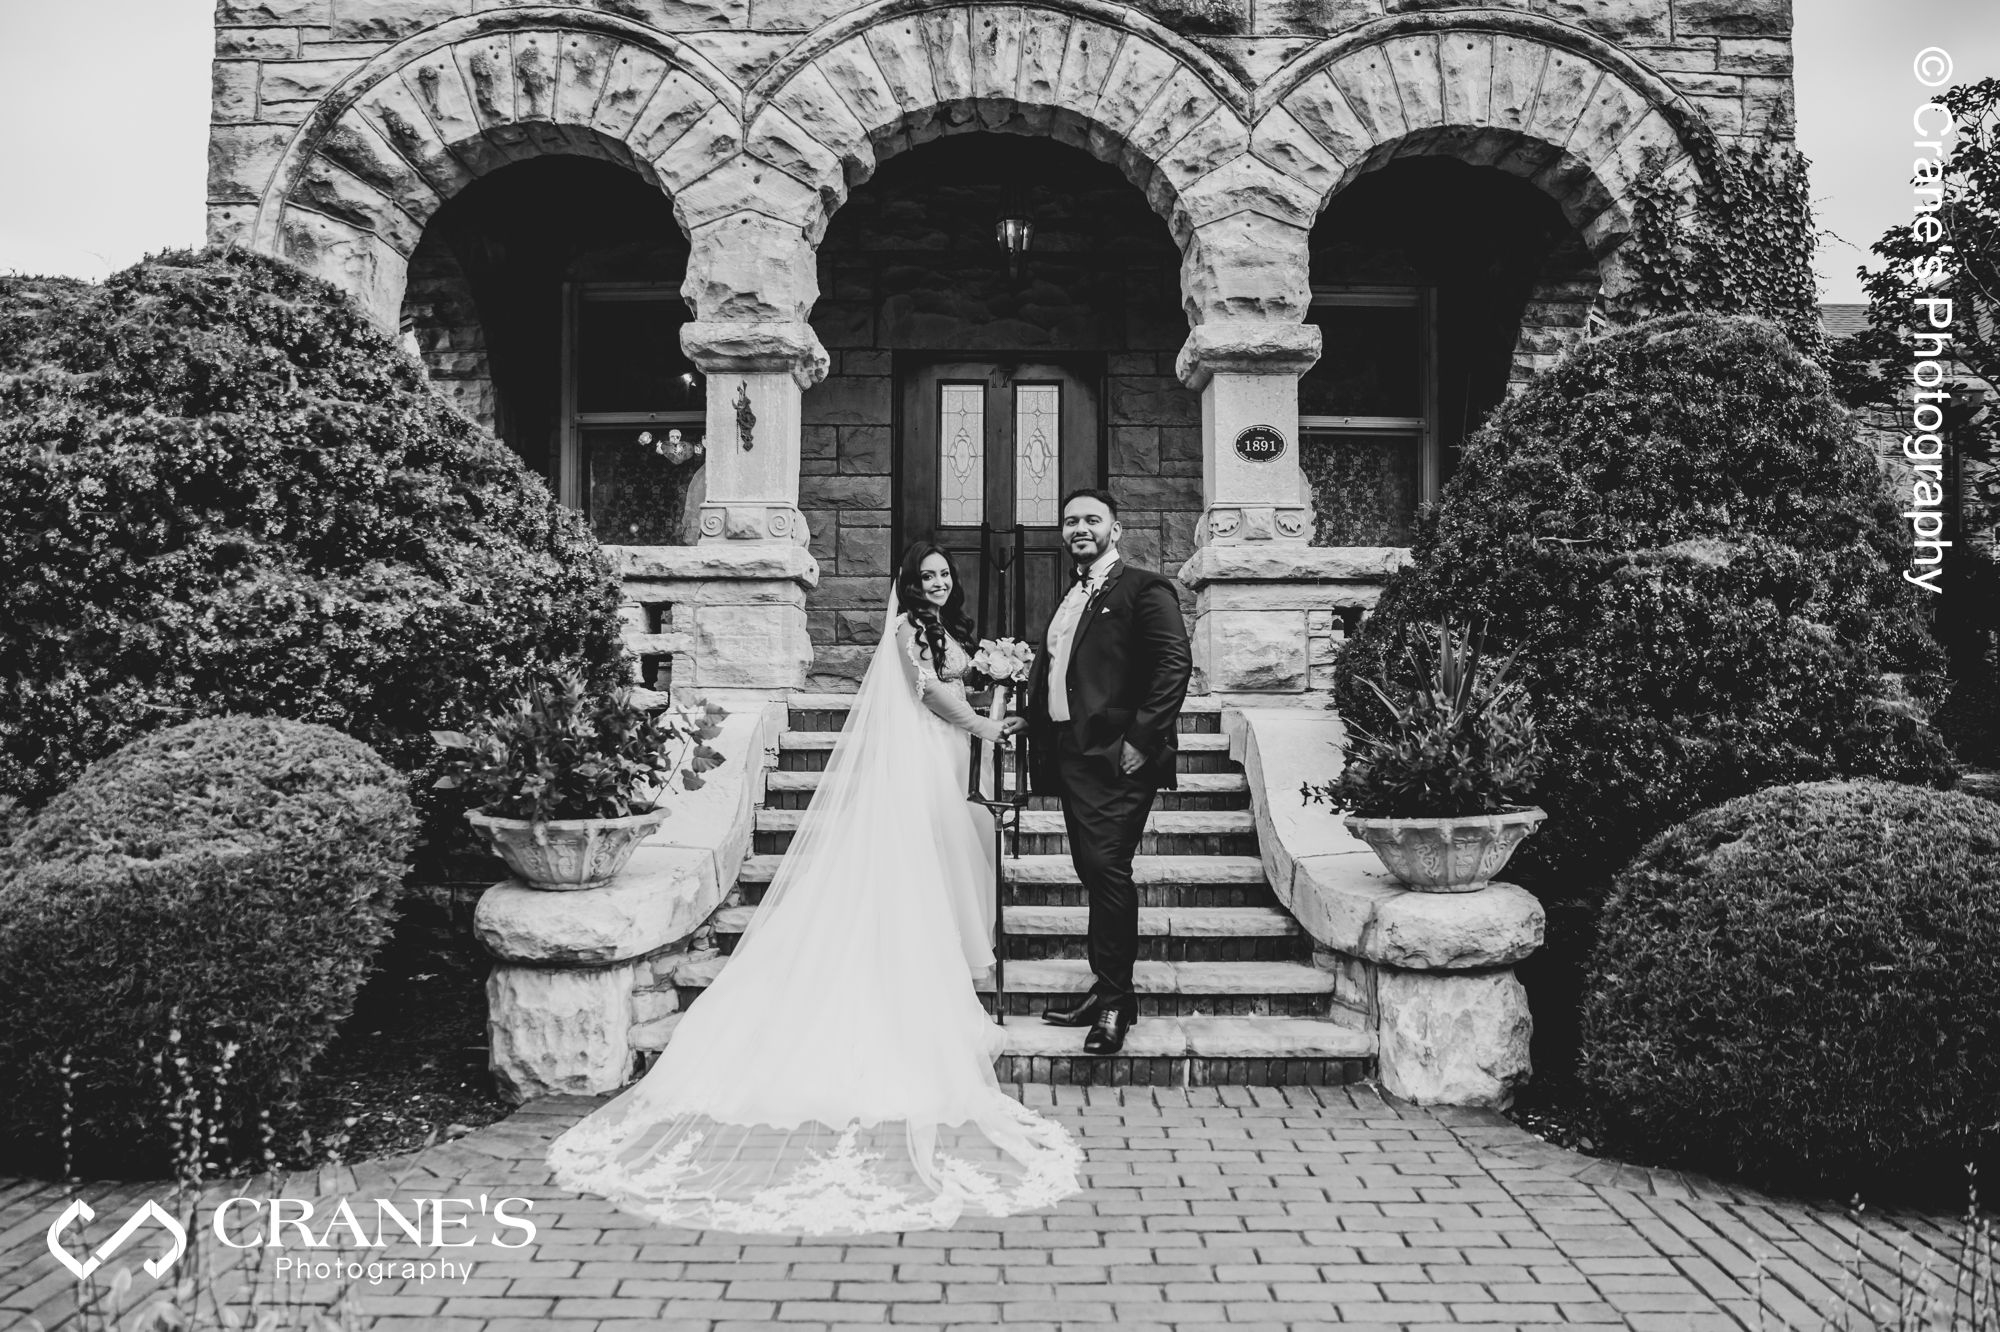 Bride wearing a long veil pose for a wedding photo at Haley Mansion